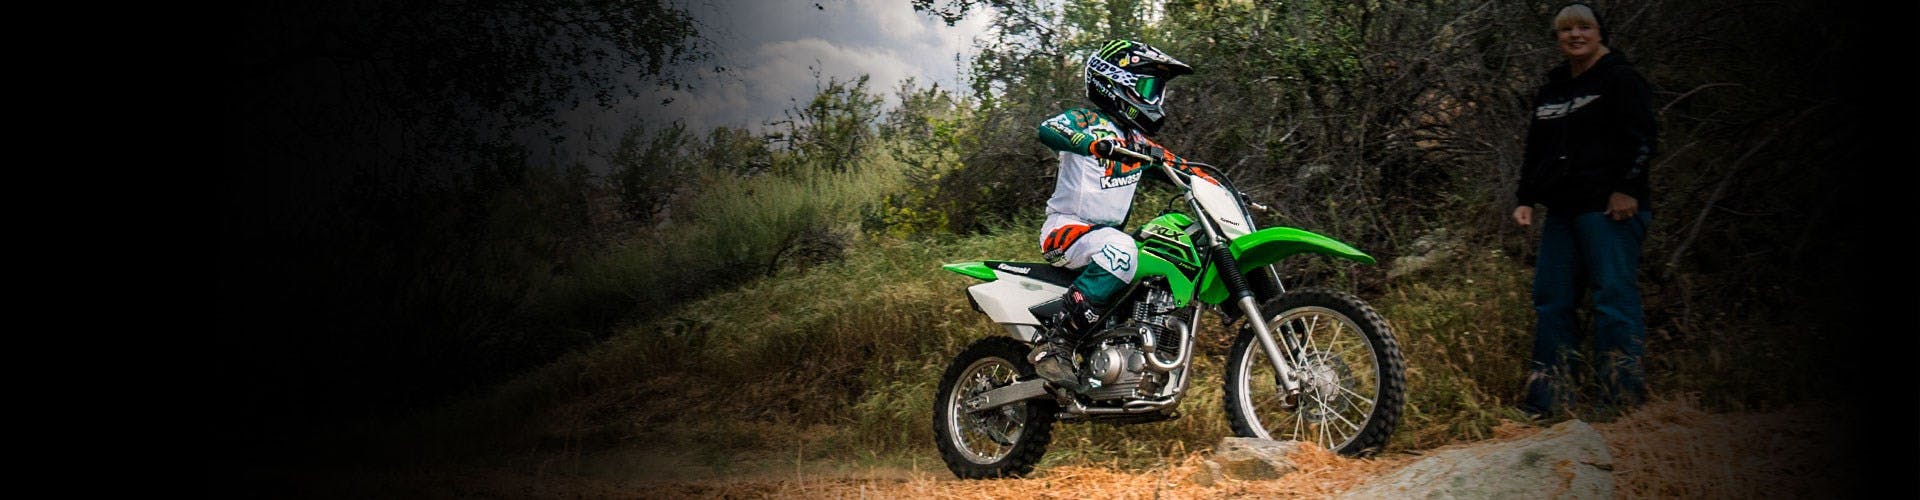 Kawasaki KLX140R in Lime Green colour on off road track